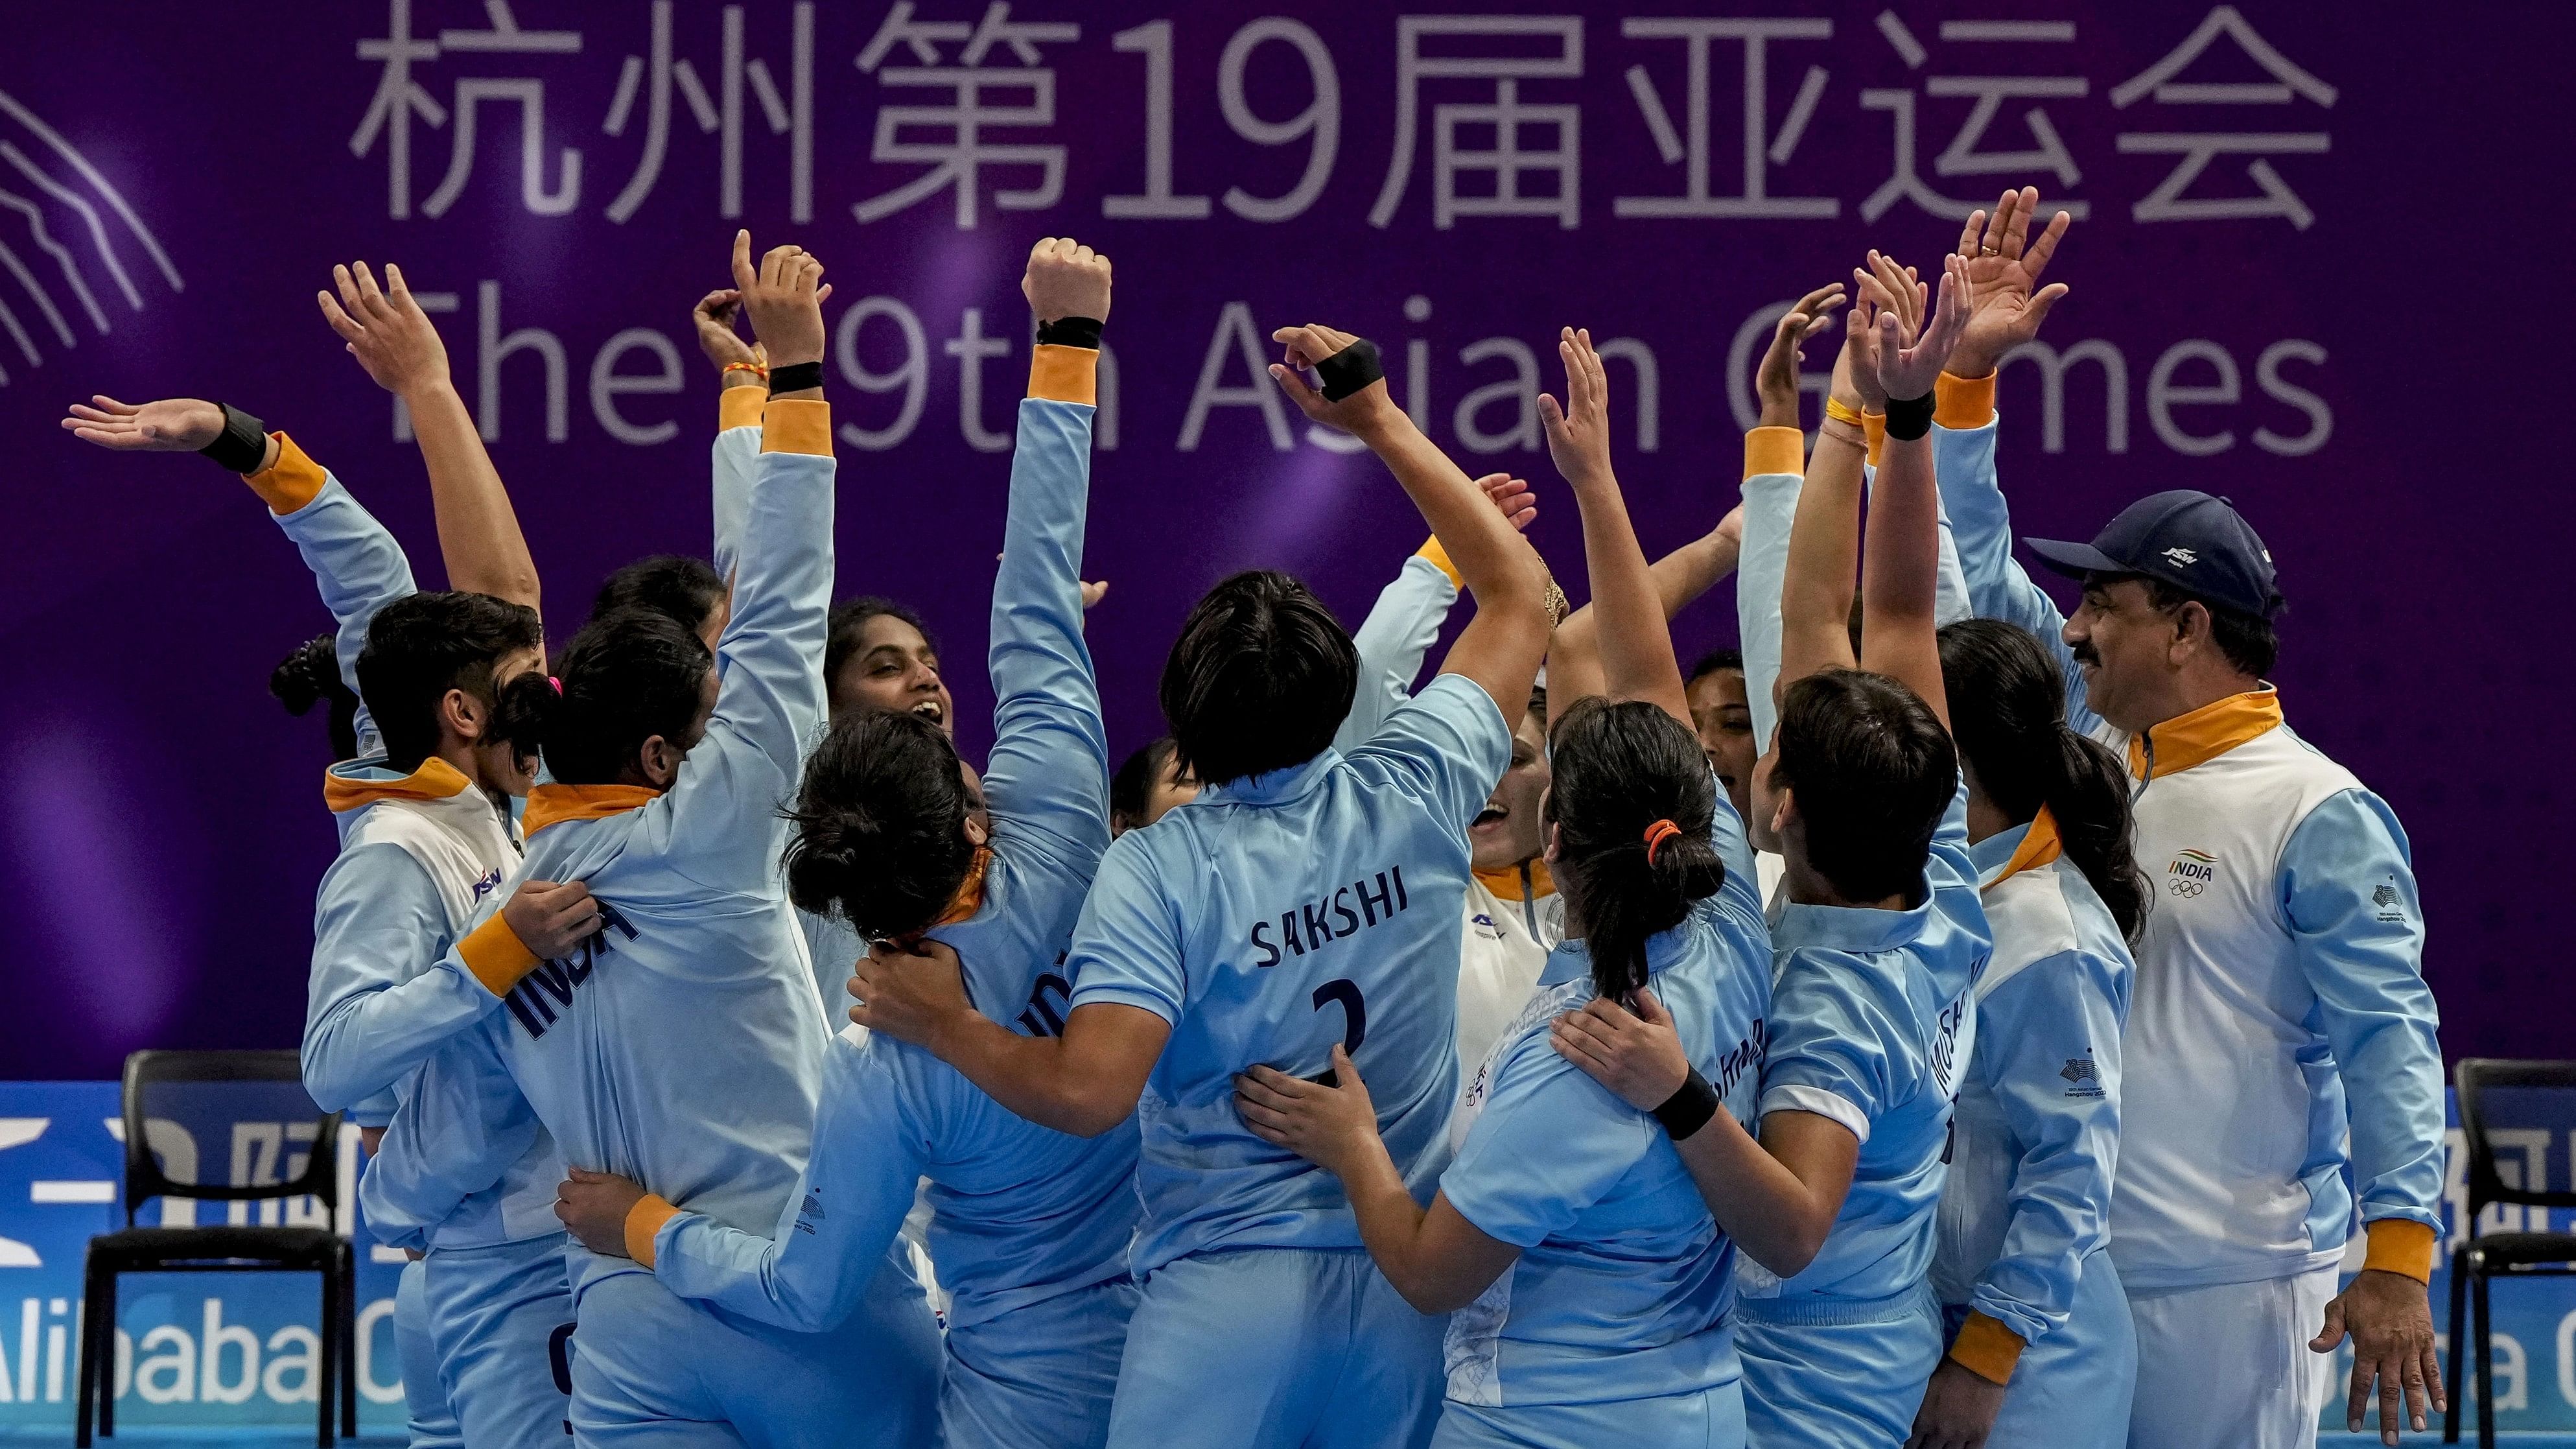 <div class="paragraphs"><p> Indian players celebrate winning the women's kabaddi semifinal match against Nepal at the 19th Asian Games.</p></div>